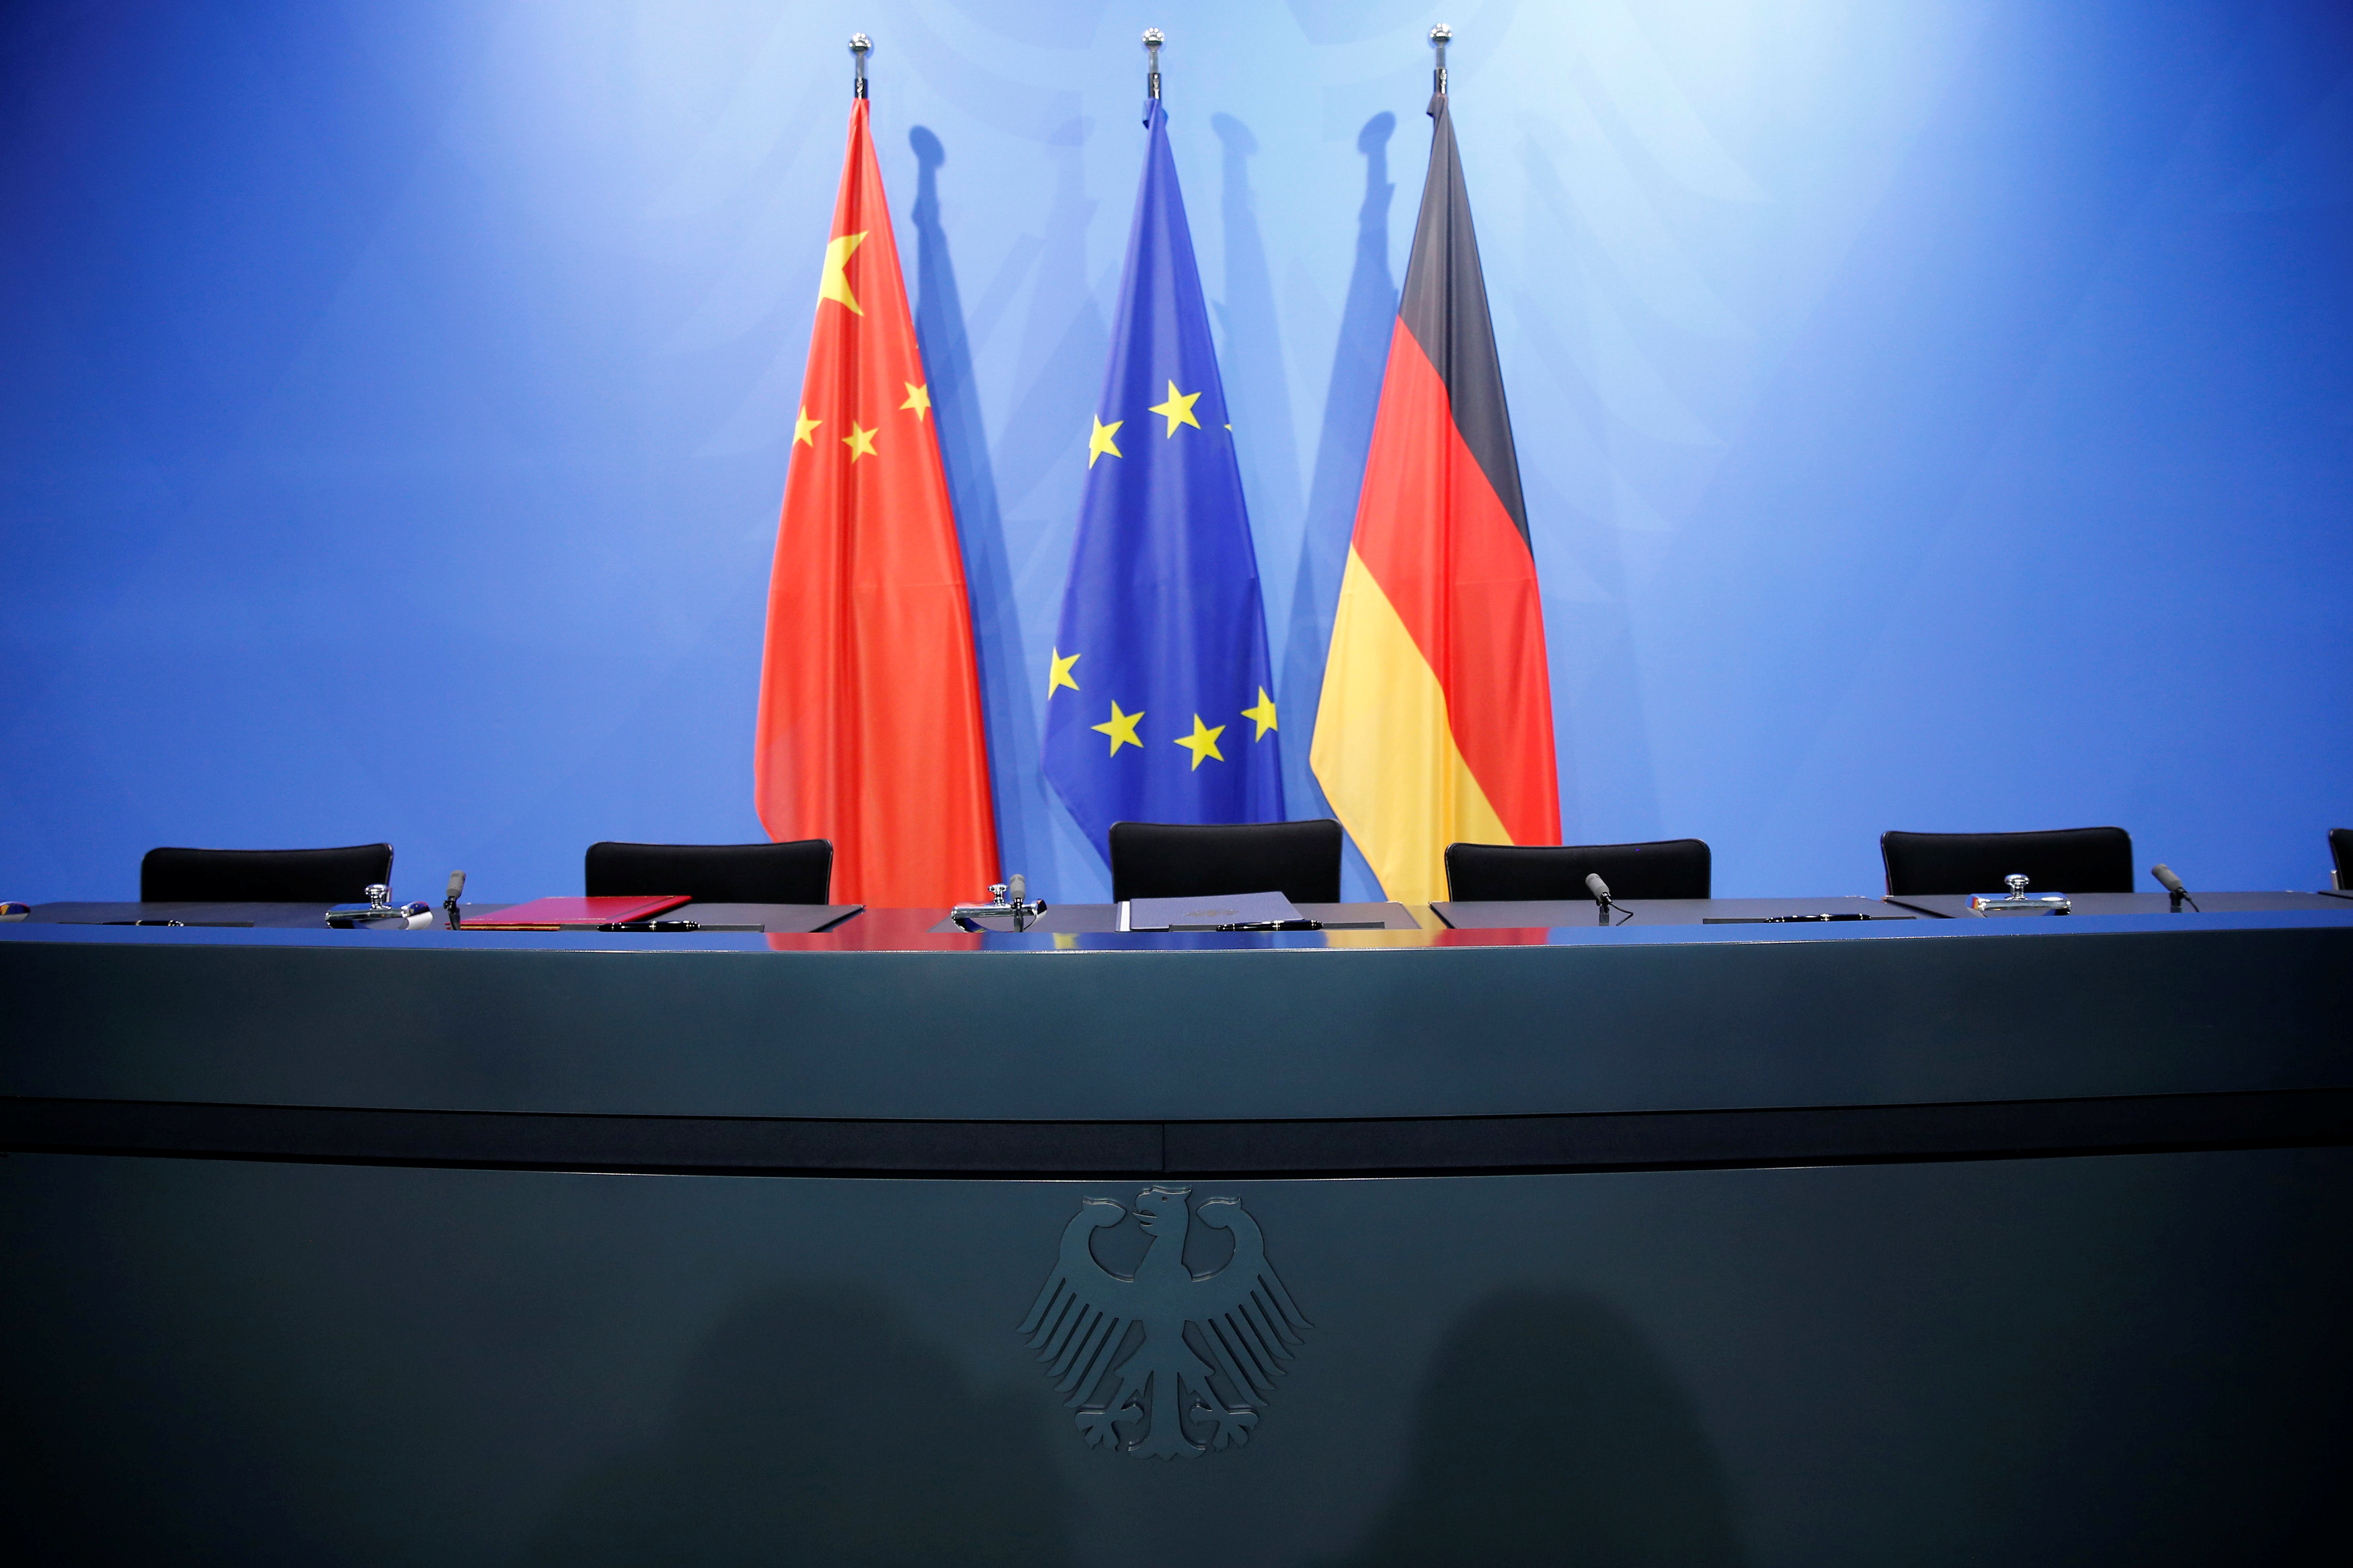 The Chinese, European Union (EU) and German national flags are pictured at the Chancellery in Berlin